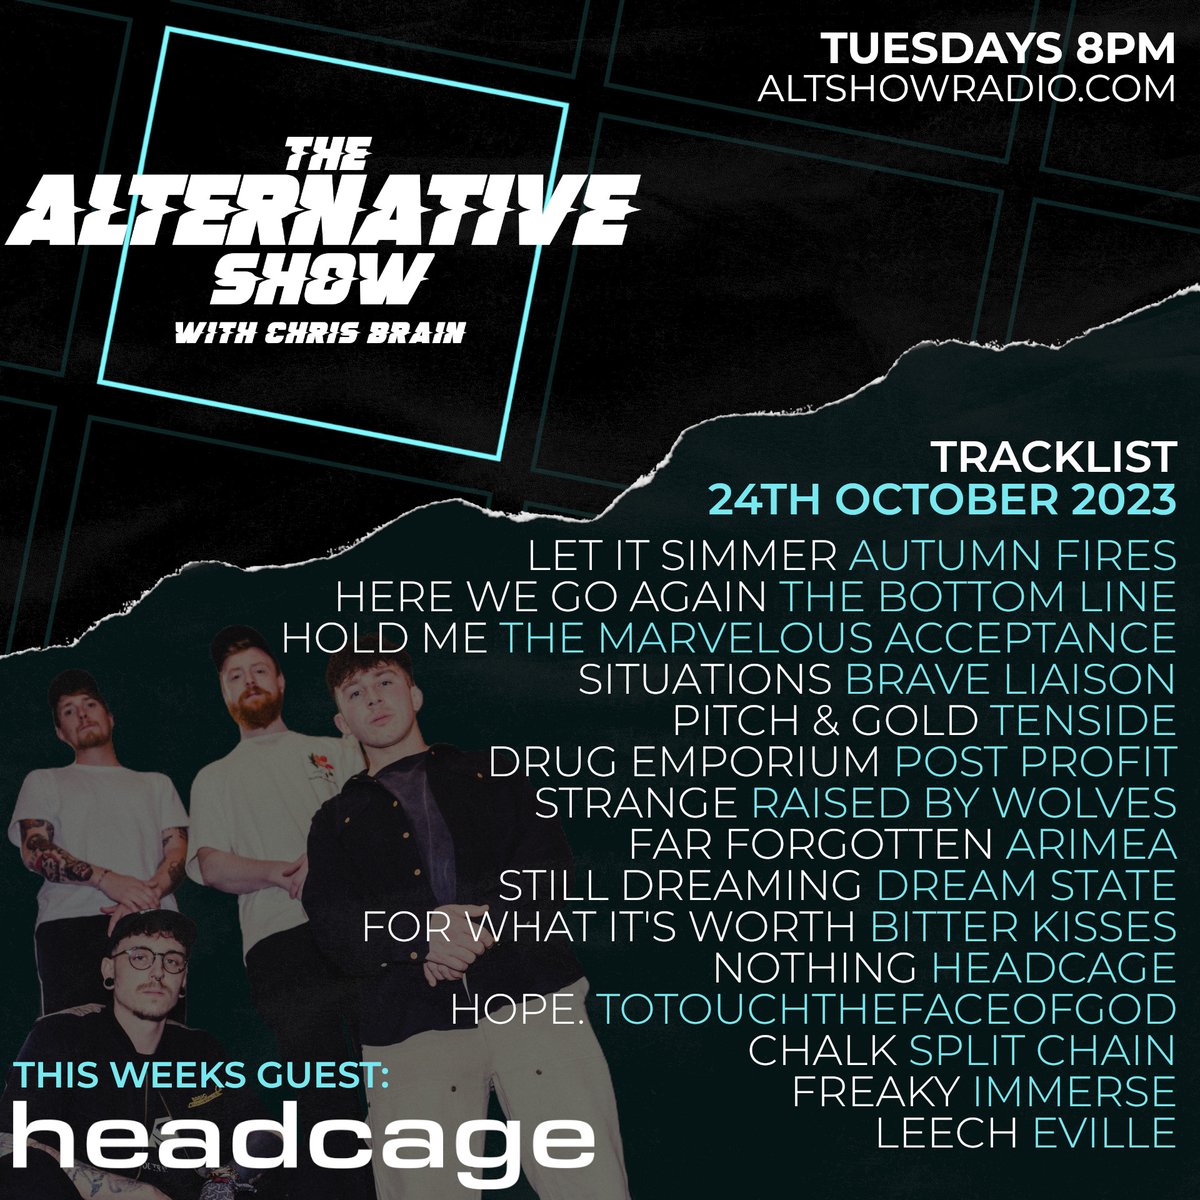 💥 LISTEN NOW! 👉 bit.ly/3MgL26R 💥 This week I am joined by @headcageuk to chat about their debut EP 'under my skin' and our shared love of @Fightstarmusic ! We also have this weeks 🔥 HOTTEST TRACK 🔥 @DreamStateUK plus all this...